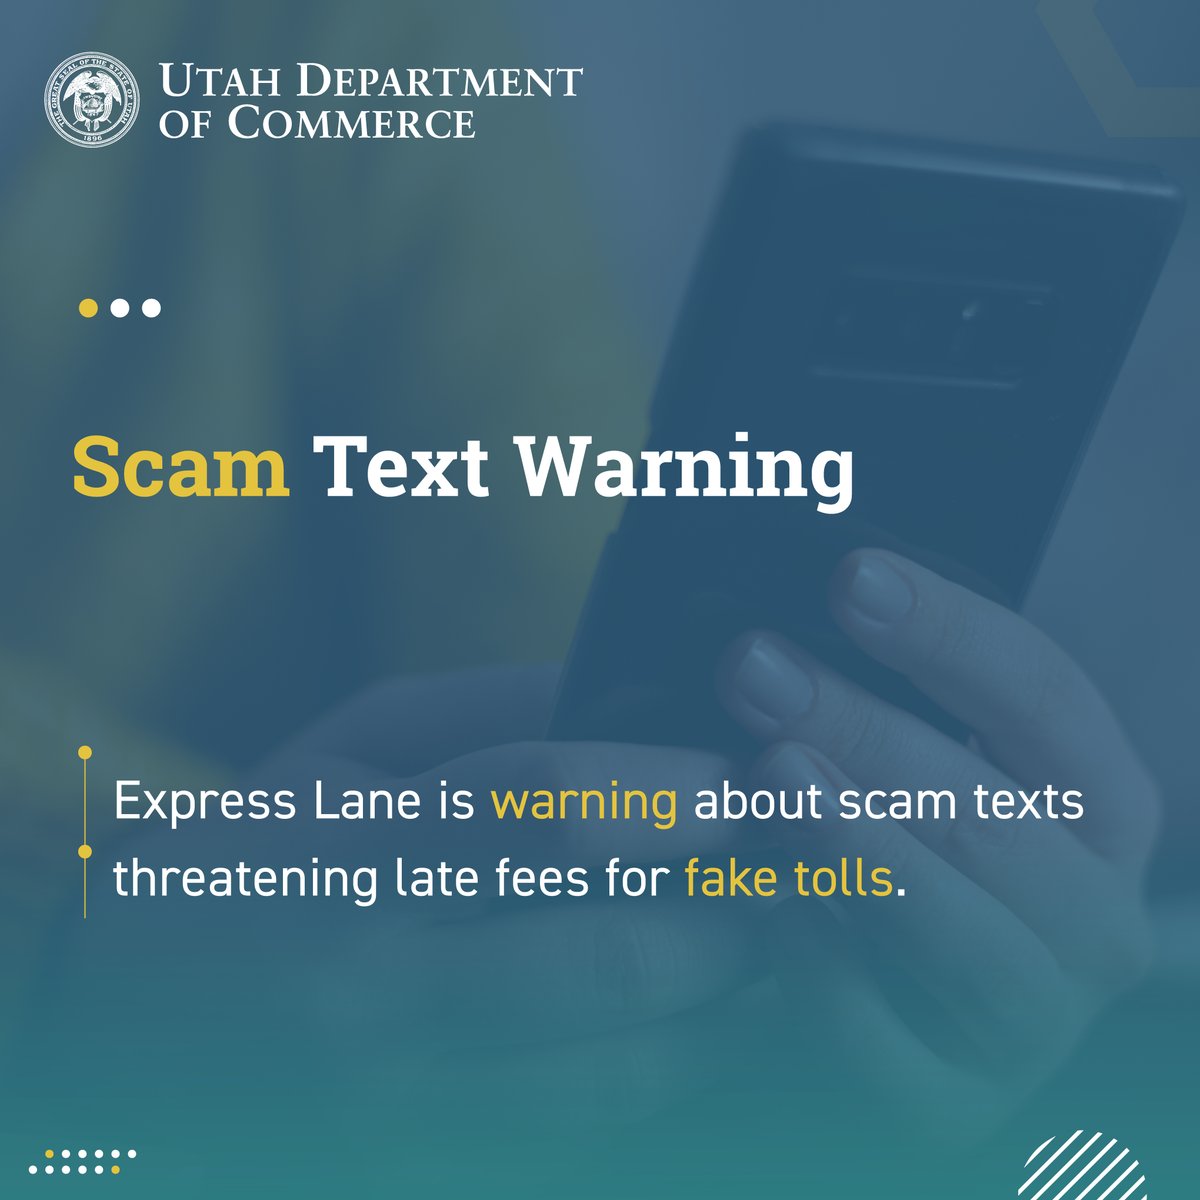 Attention Drivers! Beware of scam texts claiming unpaid Express Lanes tolls. The FBI Internet Crime Complaint Center is warning about 'smishing' texts threatening late fees for fake tolls. Express Lanes doesn't use texts to request payments. expresspass.utah.gov @UtahDOT